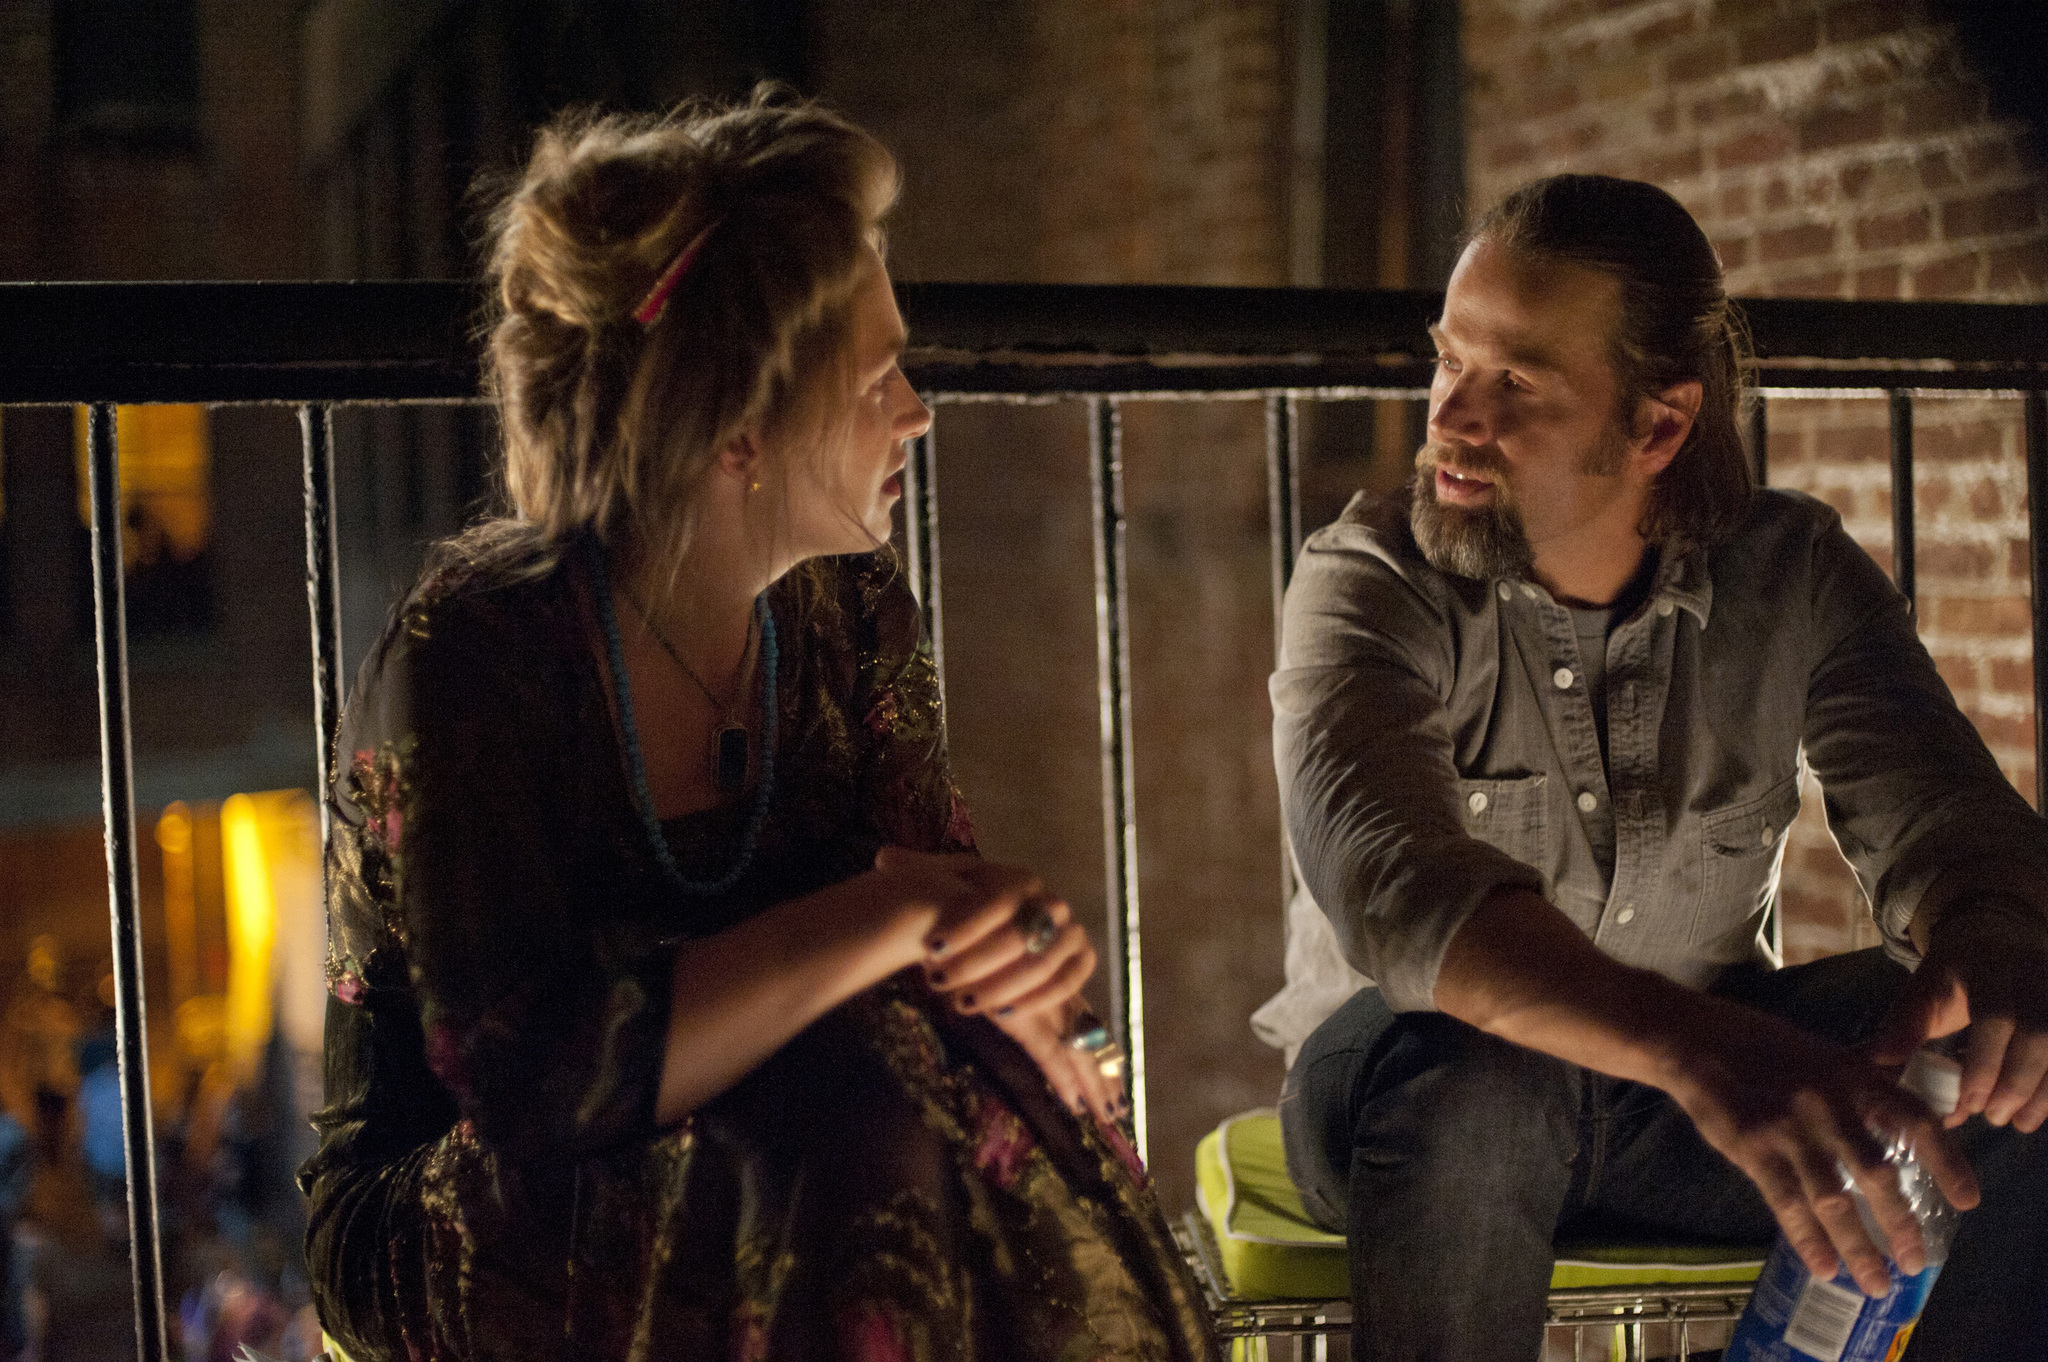 Still of James Le Gros and Jemima Kirke in Girls (2012)